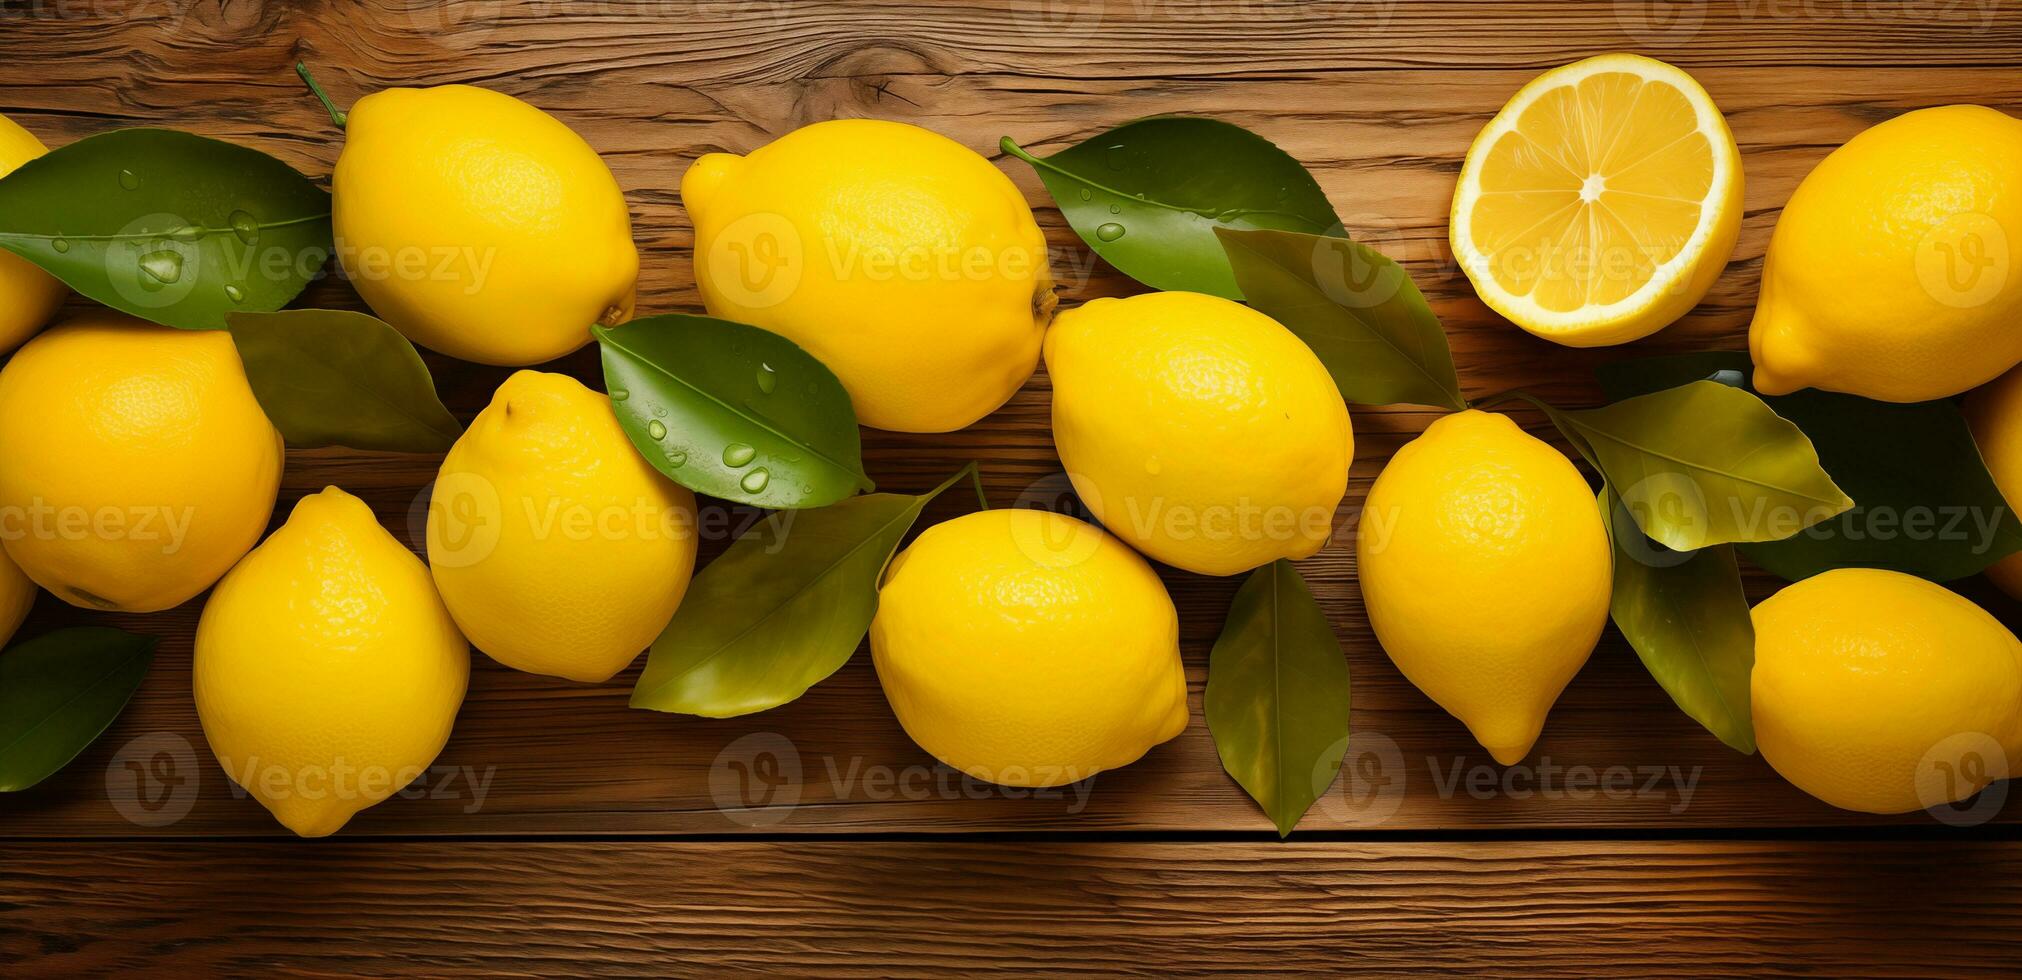 Ripe yellow lemons close-up on the background of the wooden table. photo